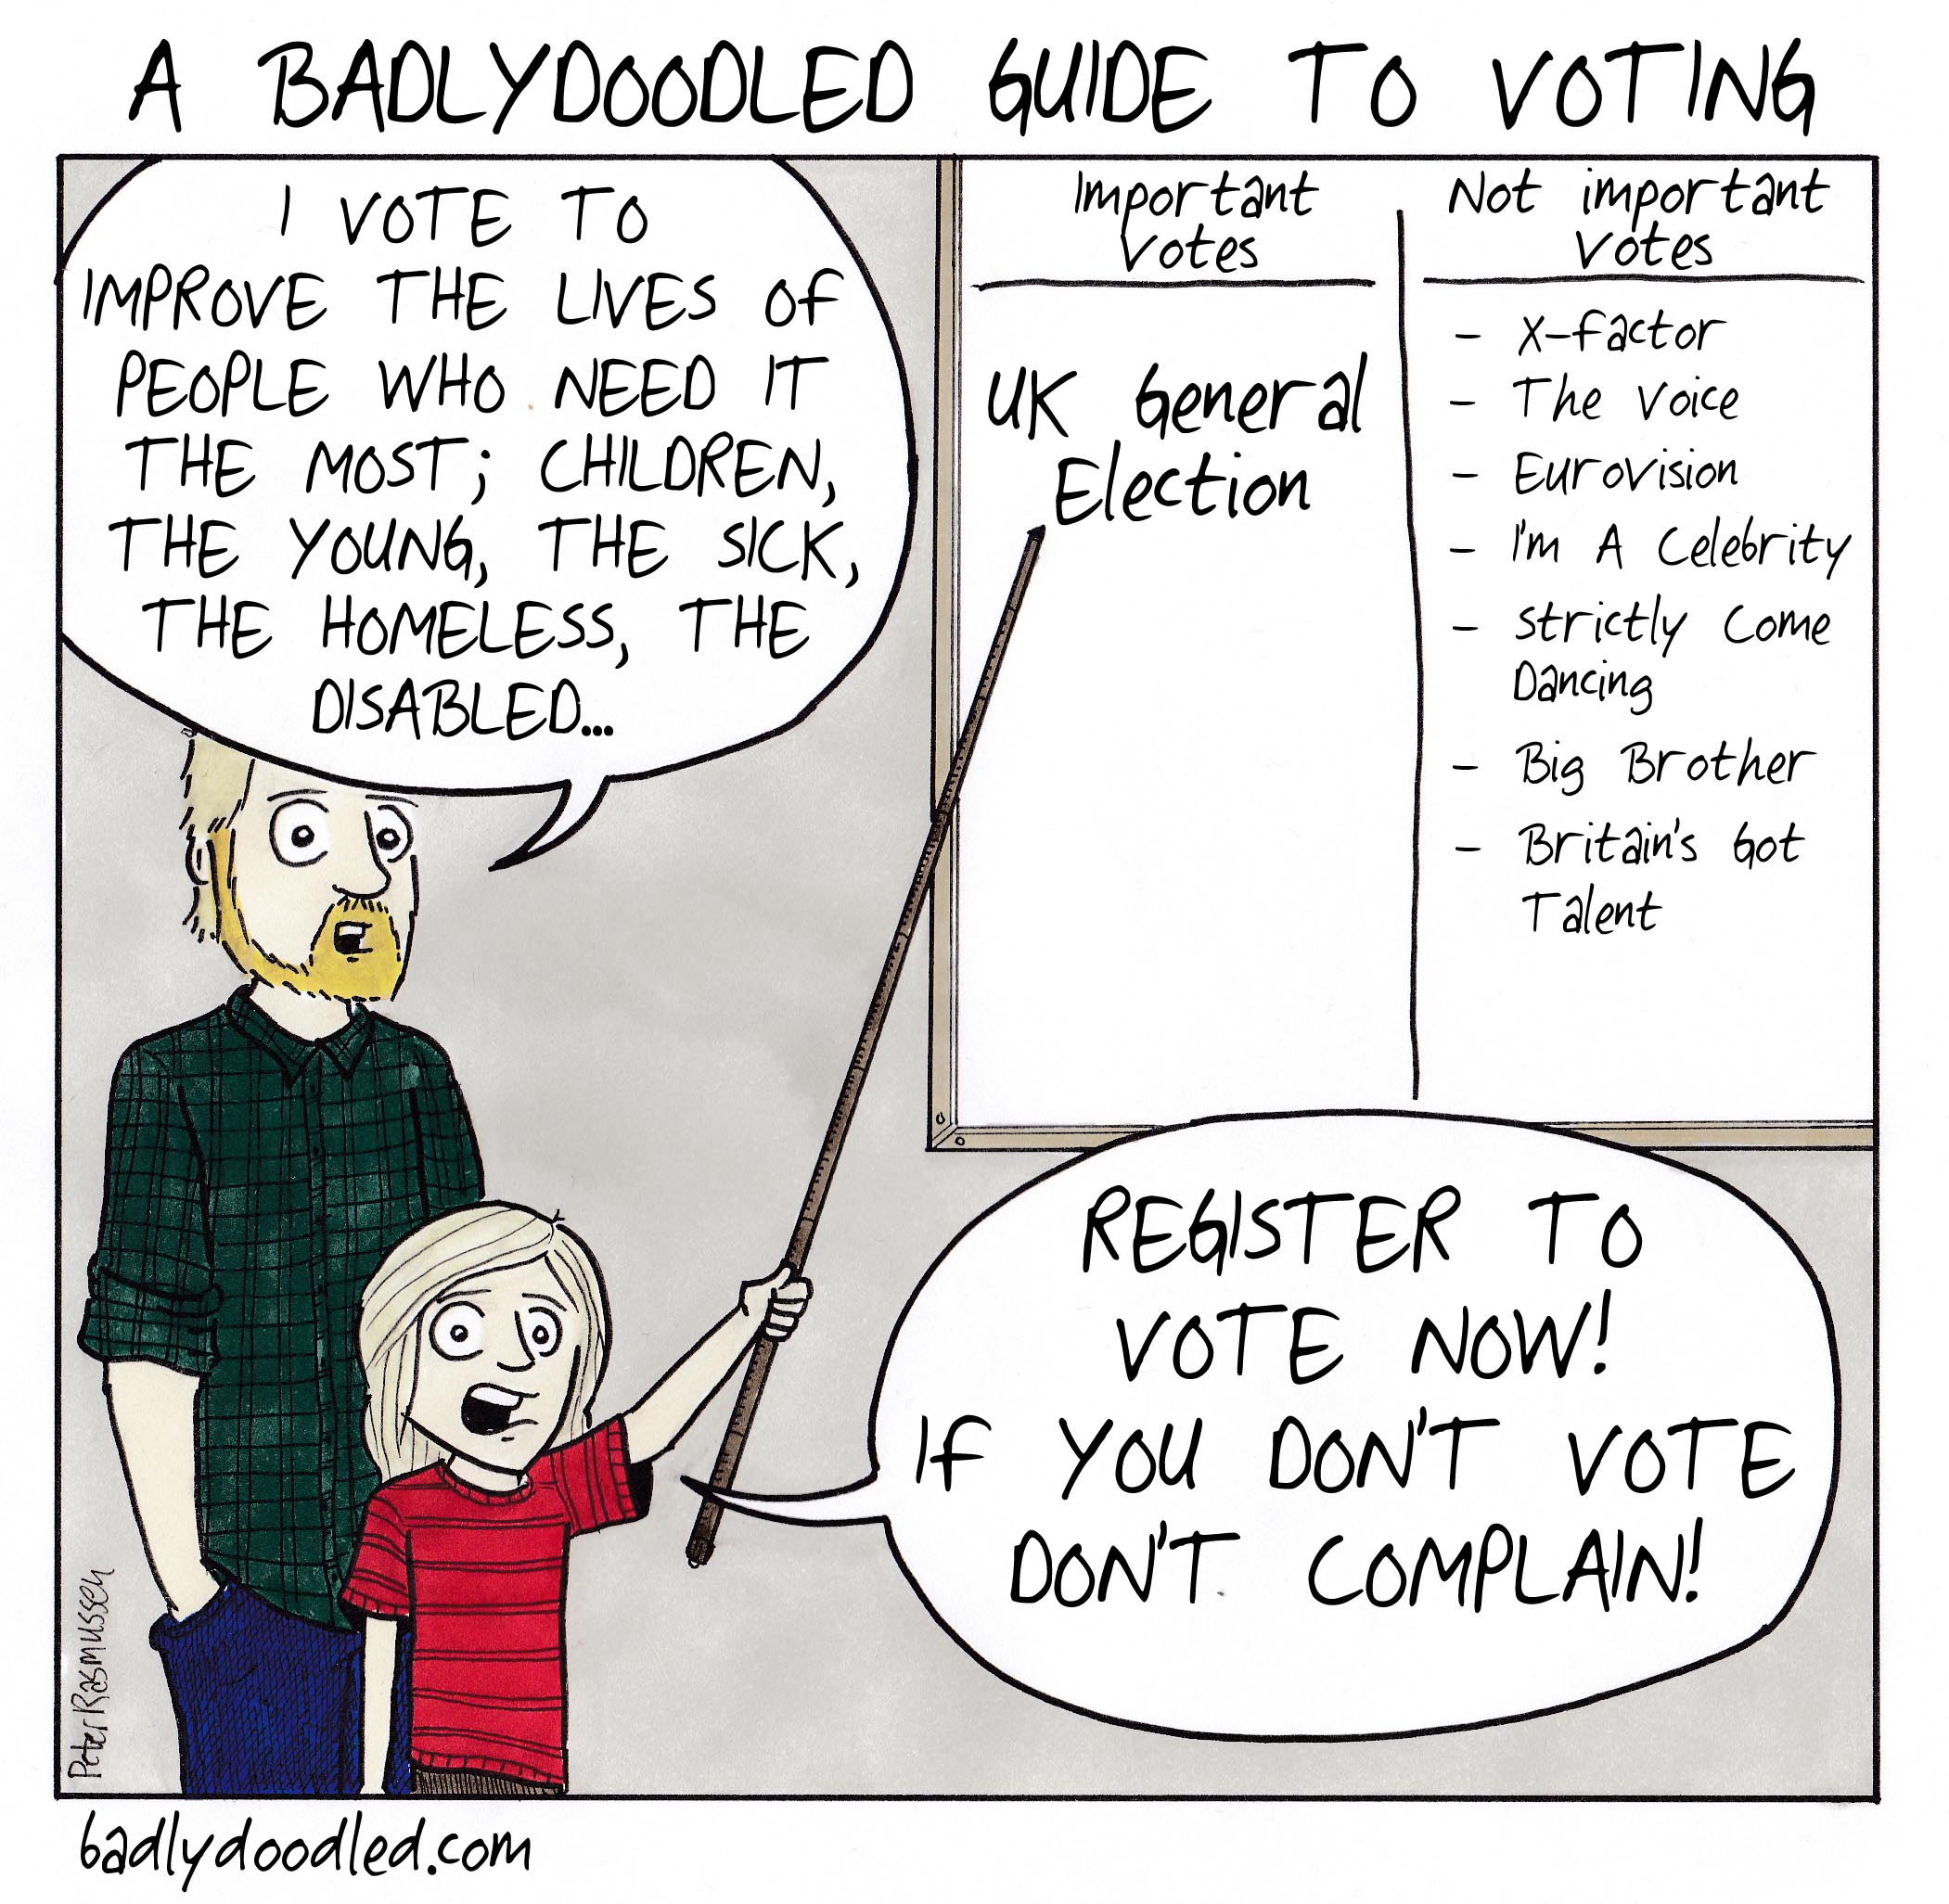 Author of web comic hopes latest illustration will encourage young people to vote